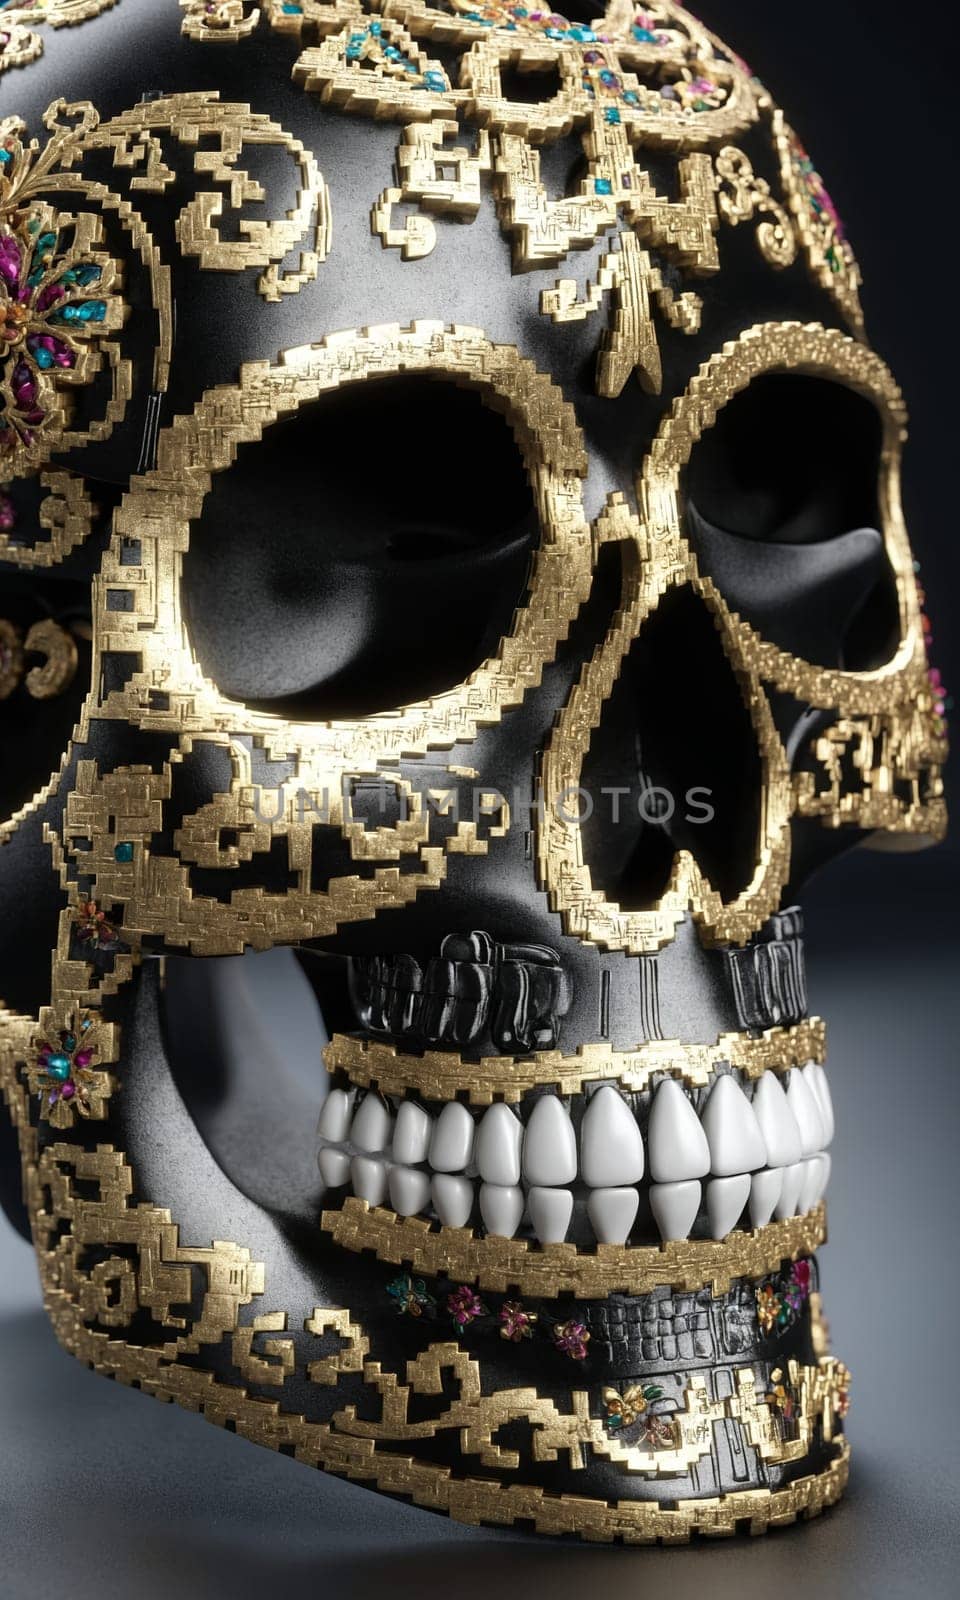 black and white image of a sugar skull on a black background. by Andre1ns